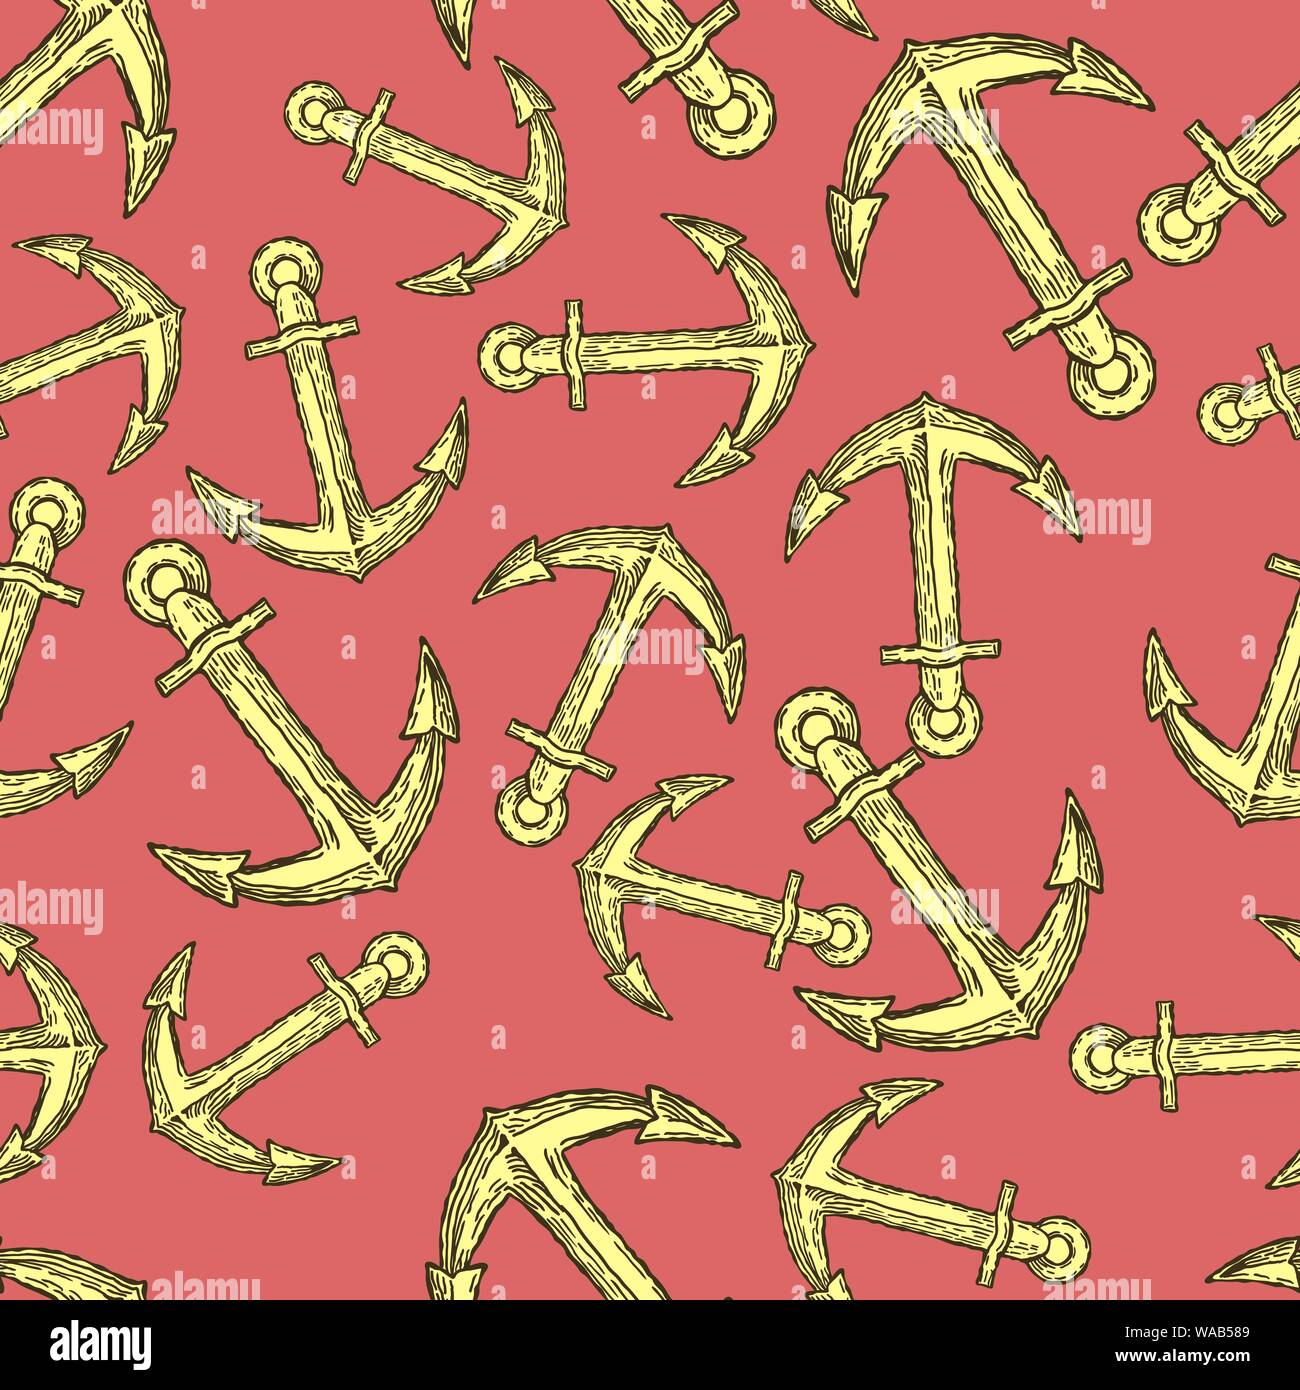 Vintage Anchor Hand Drawn Seamless Pattern Background. Vector Stock Vector